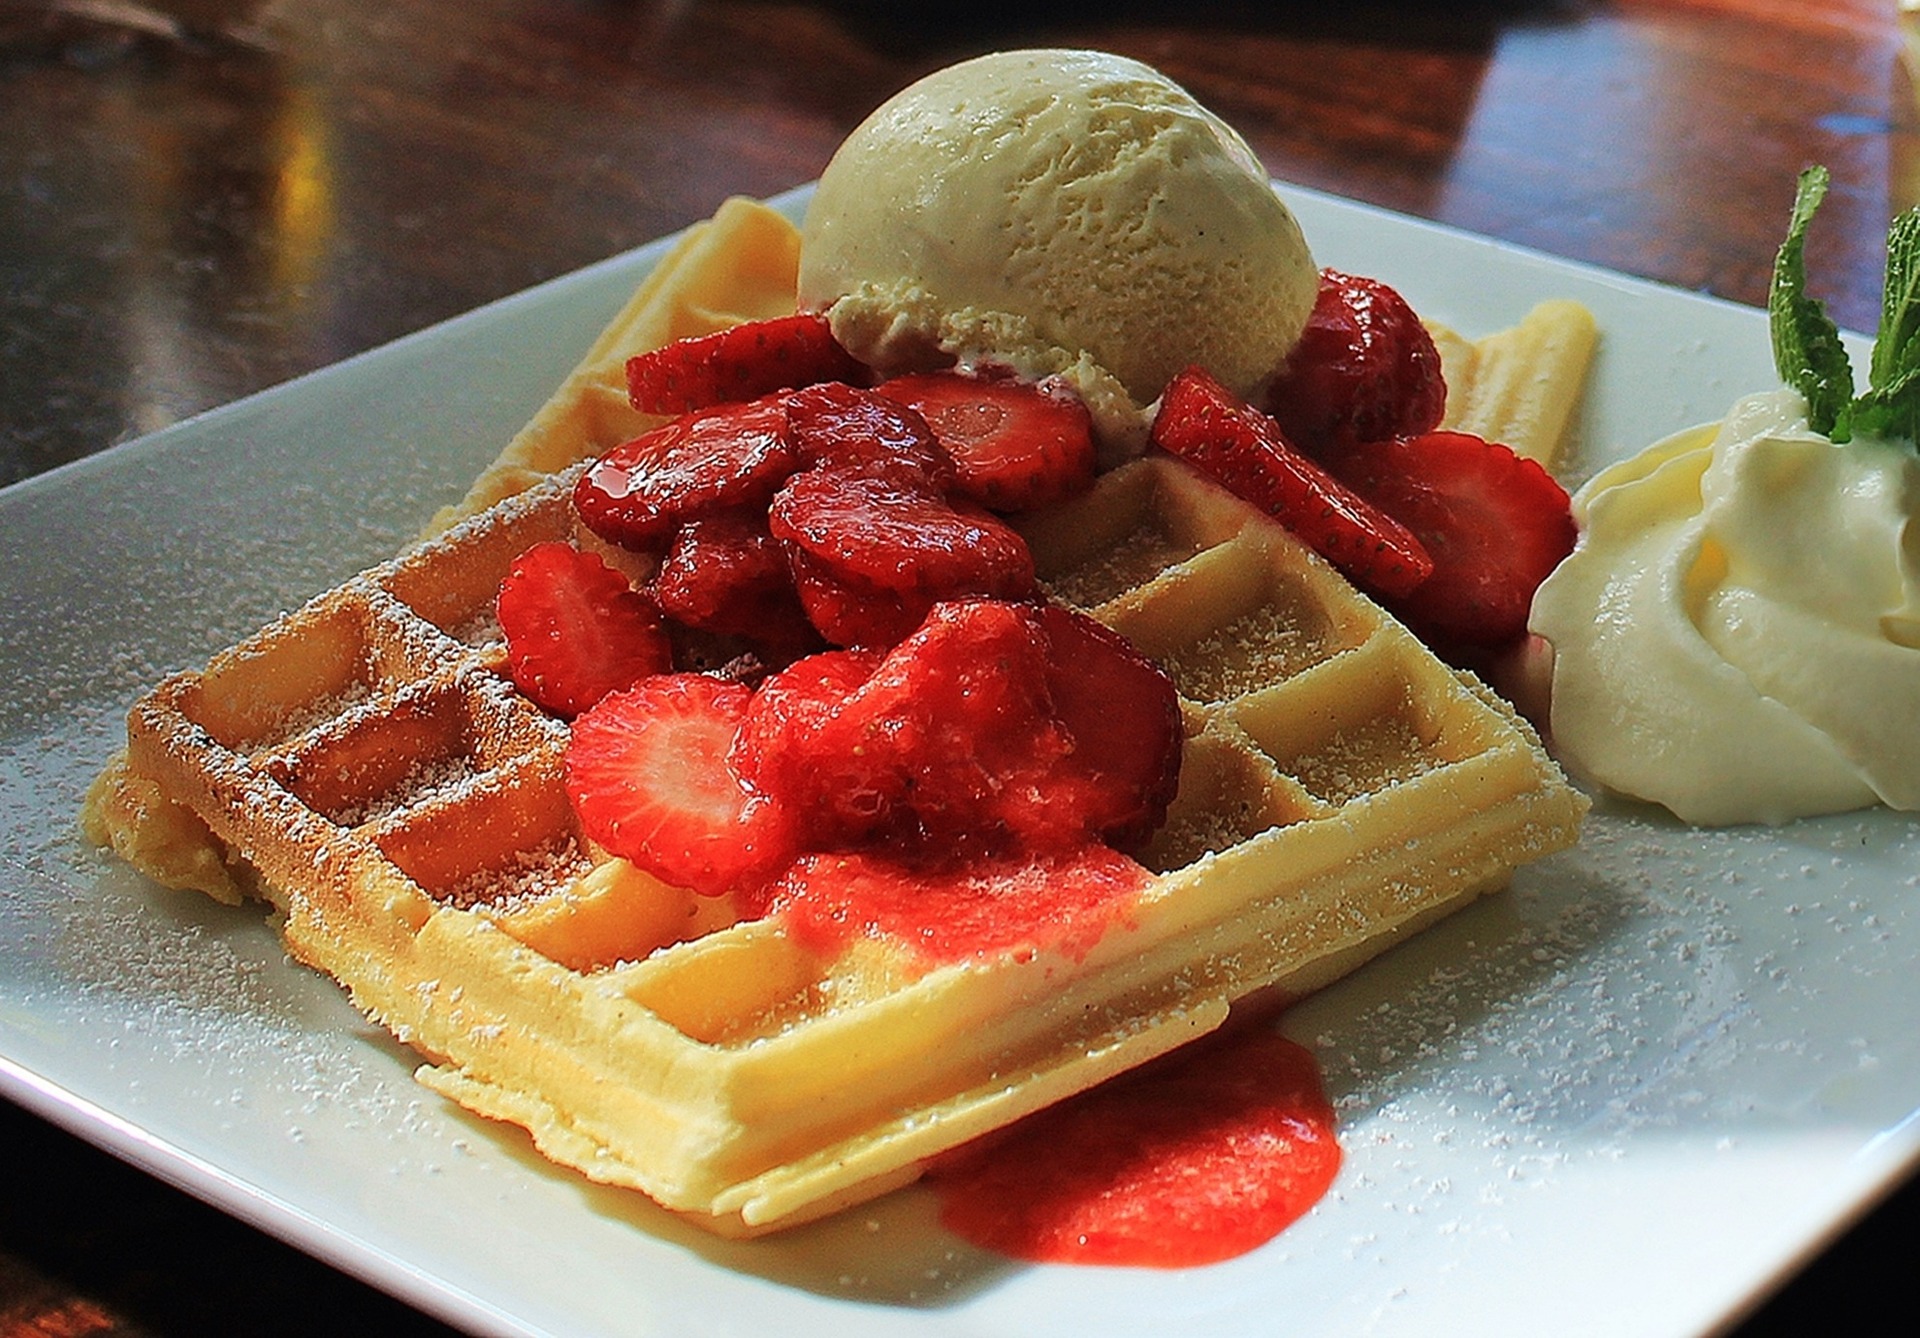 Enjoy waffles and more with this list of Sedona dining destinations